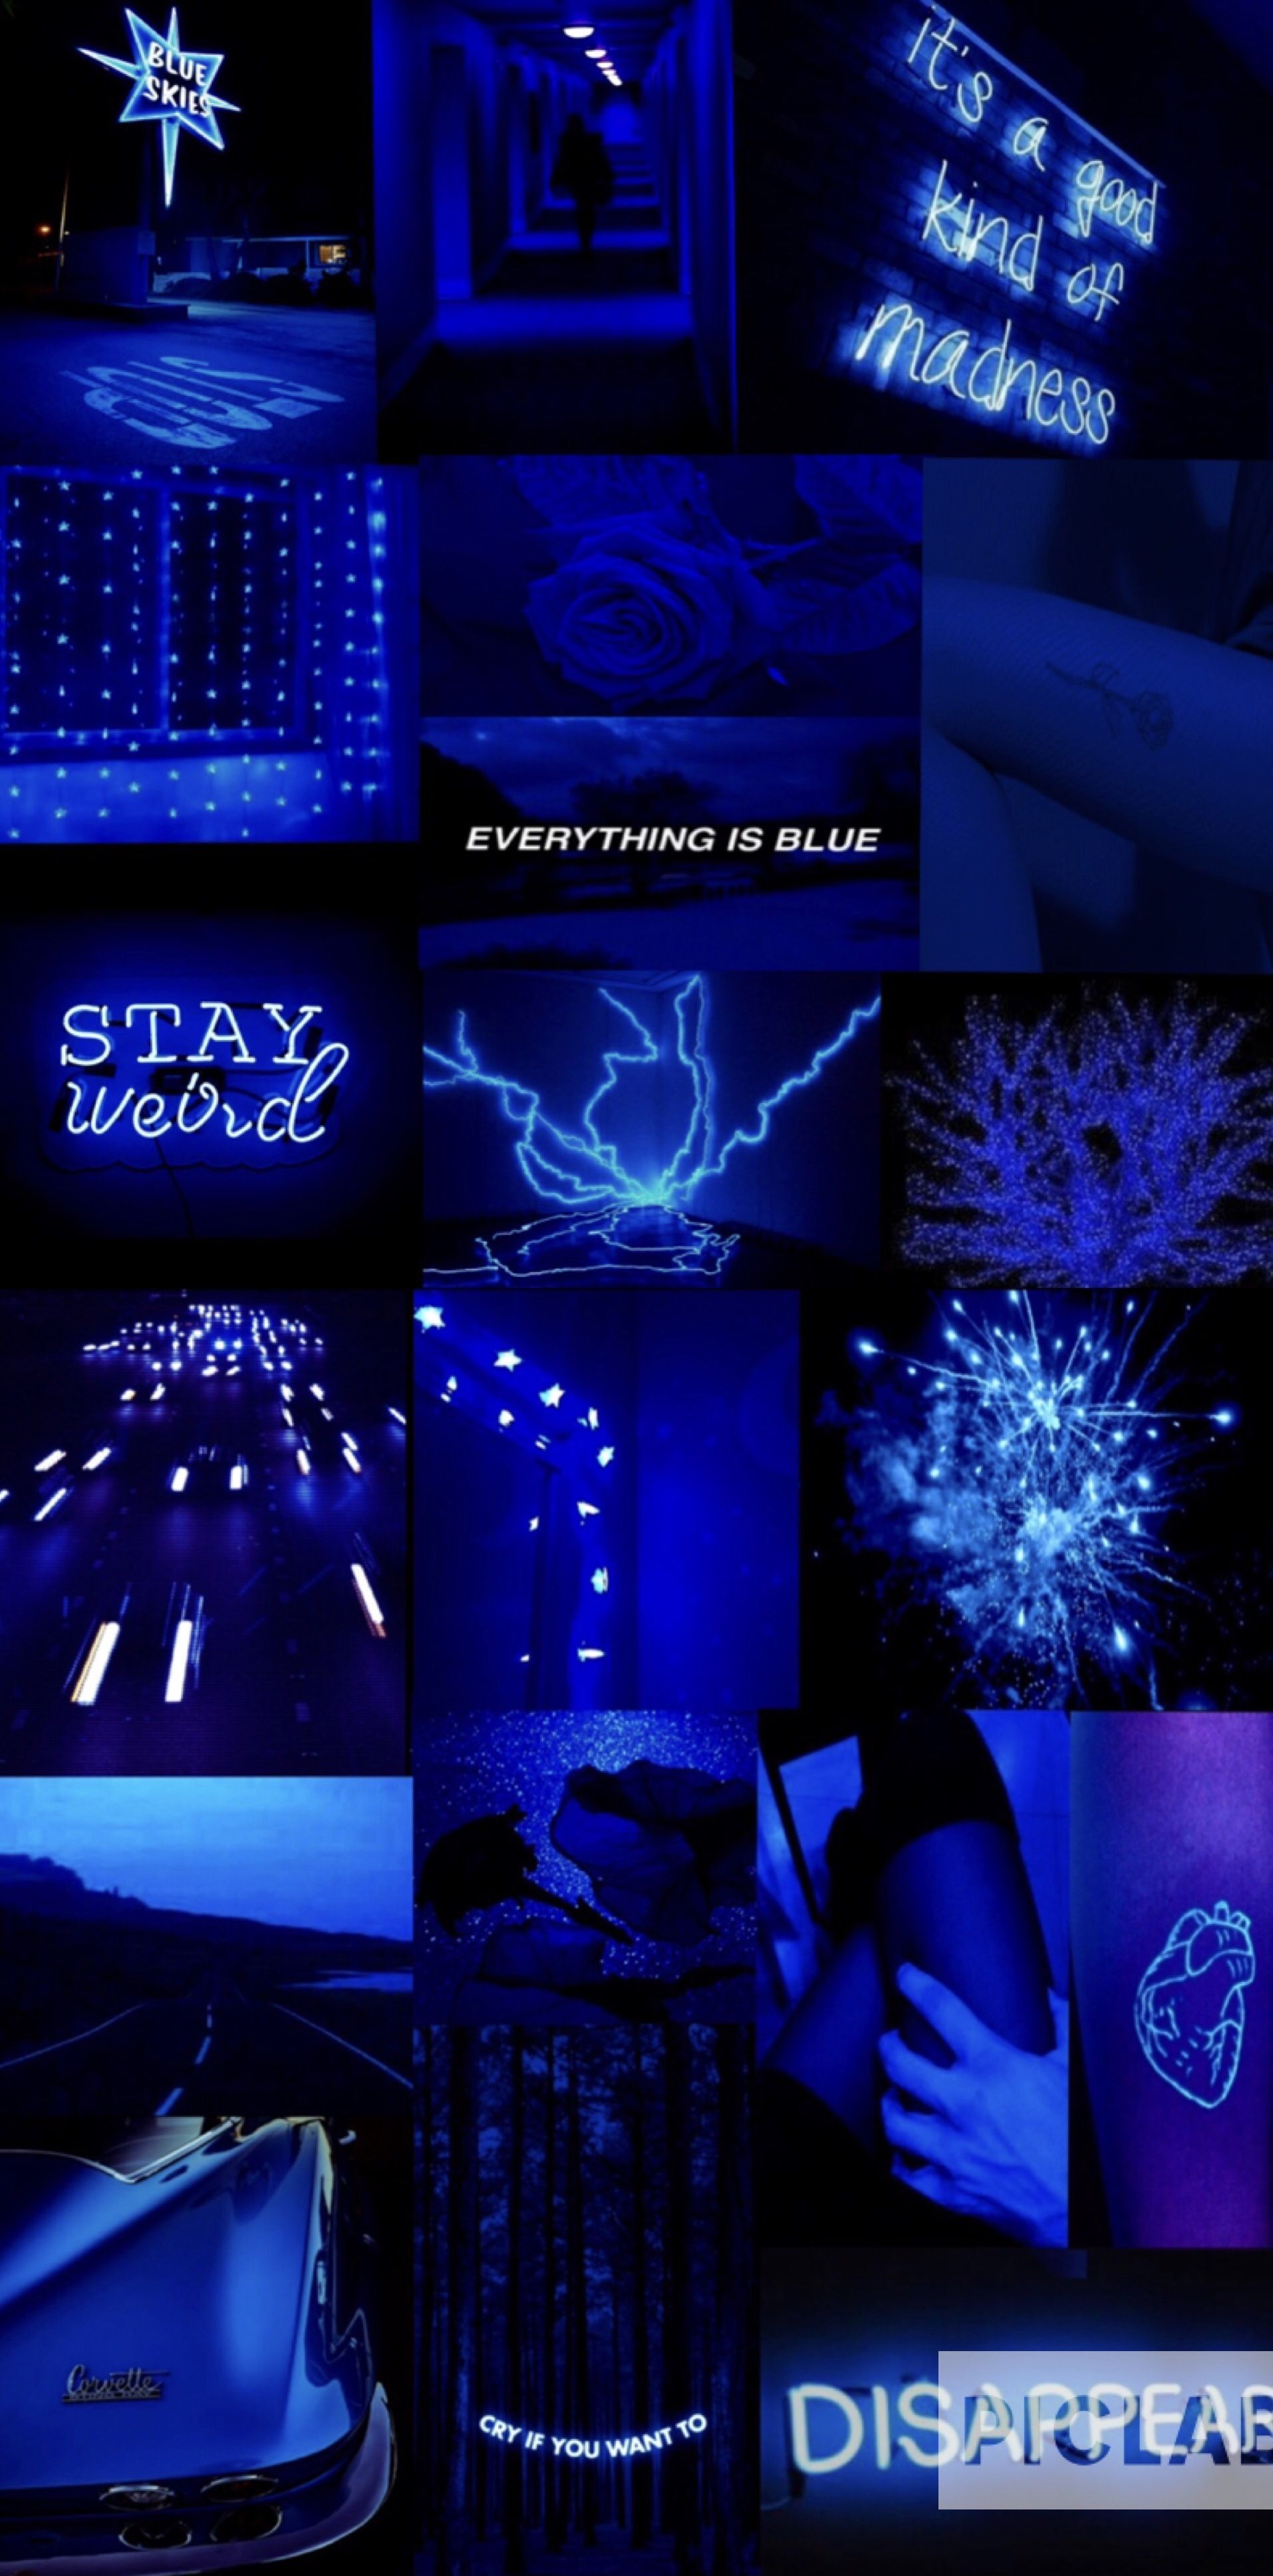 A collage of pictures with blue lighting - Blue, dark blue, neon blue, navy blue